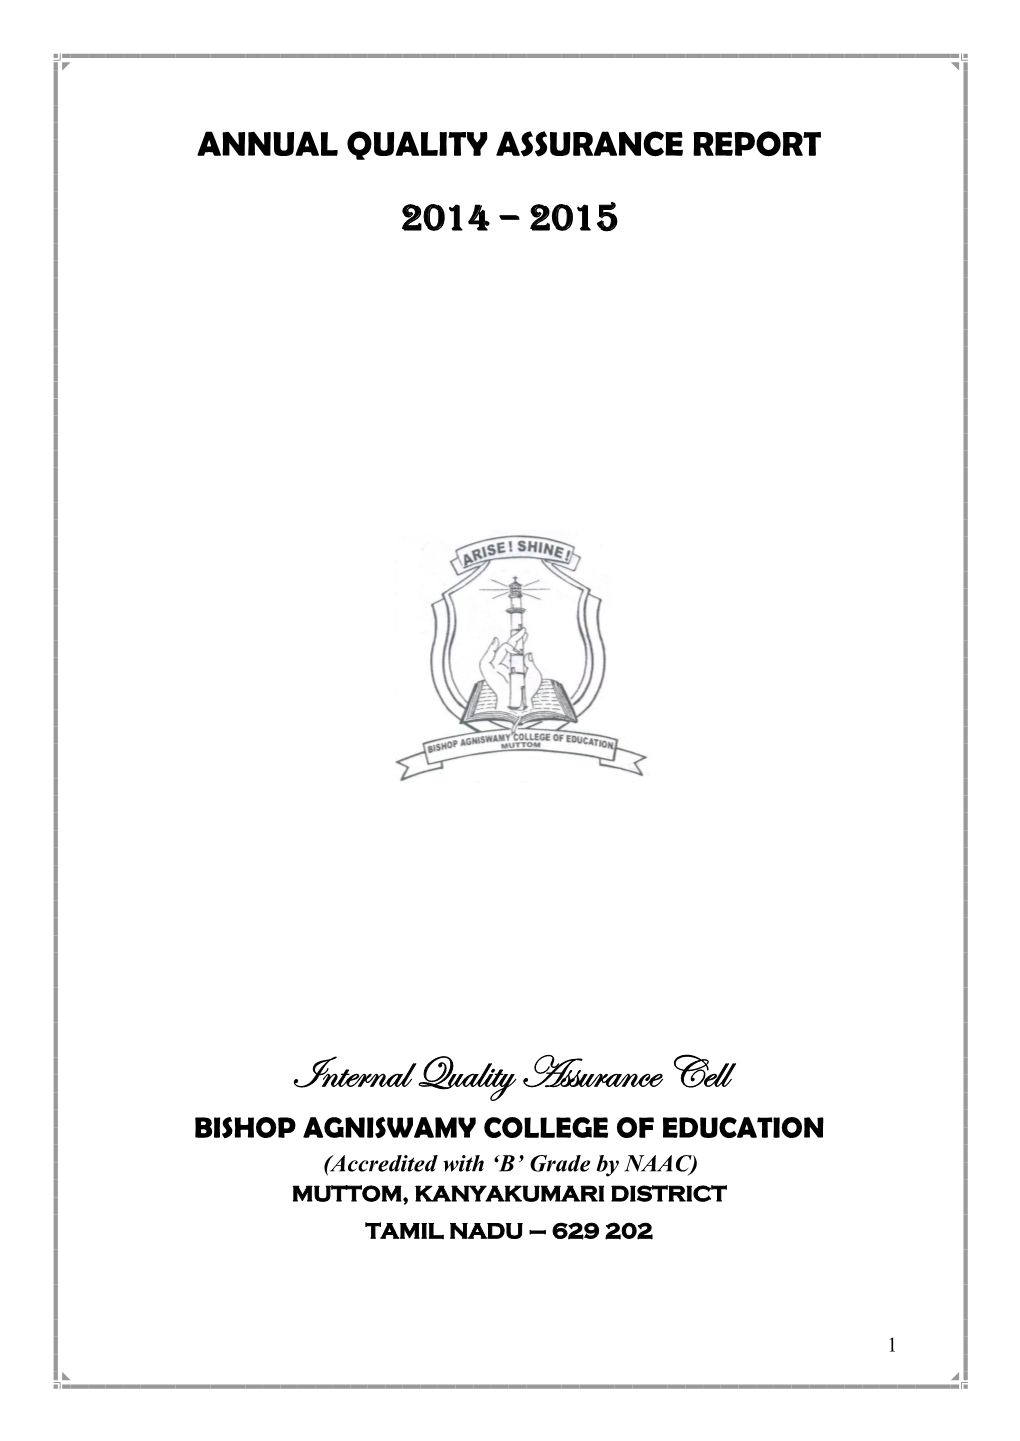 Internal Quality Assurance Cell BISHOP AGNISWAMY COLLEGE of EDUCATION (Accredited with ‘B’ Grade by NAAC) MUTTOM, KANYAKUMARI DISTRICT TAMIL NADU – 629 202